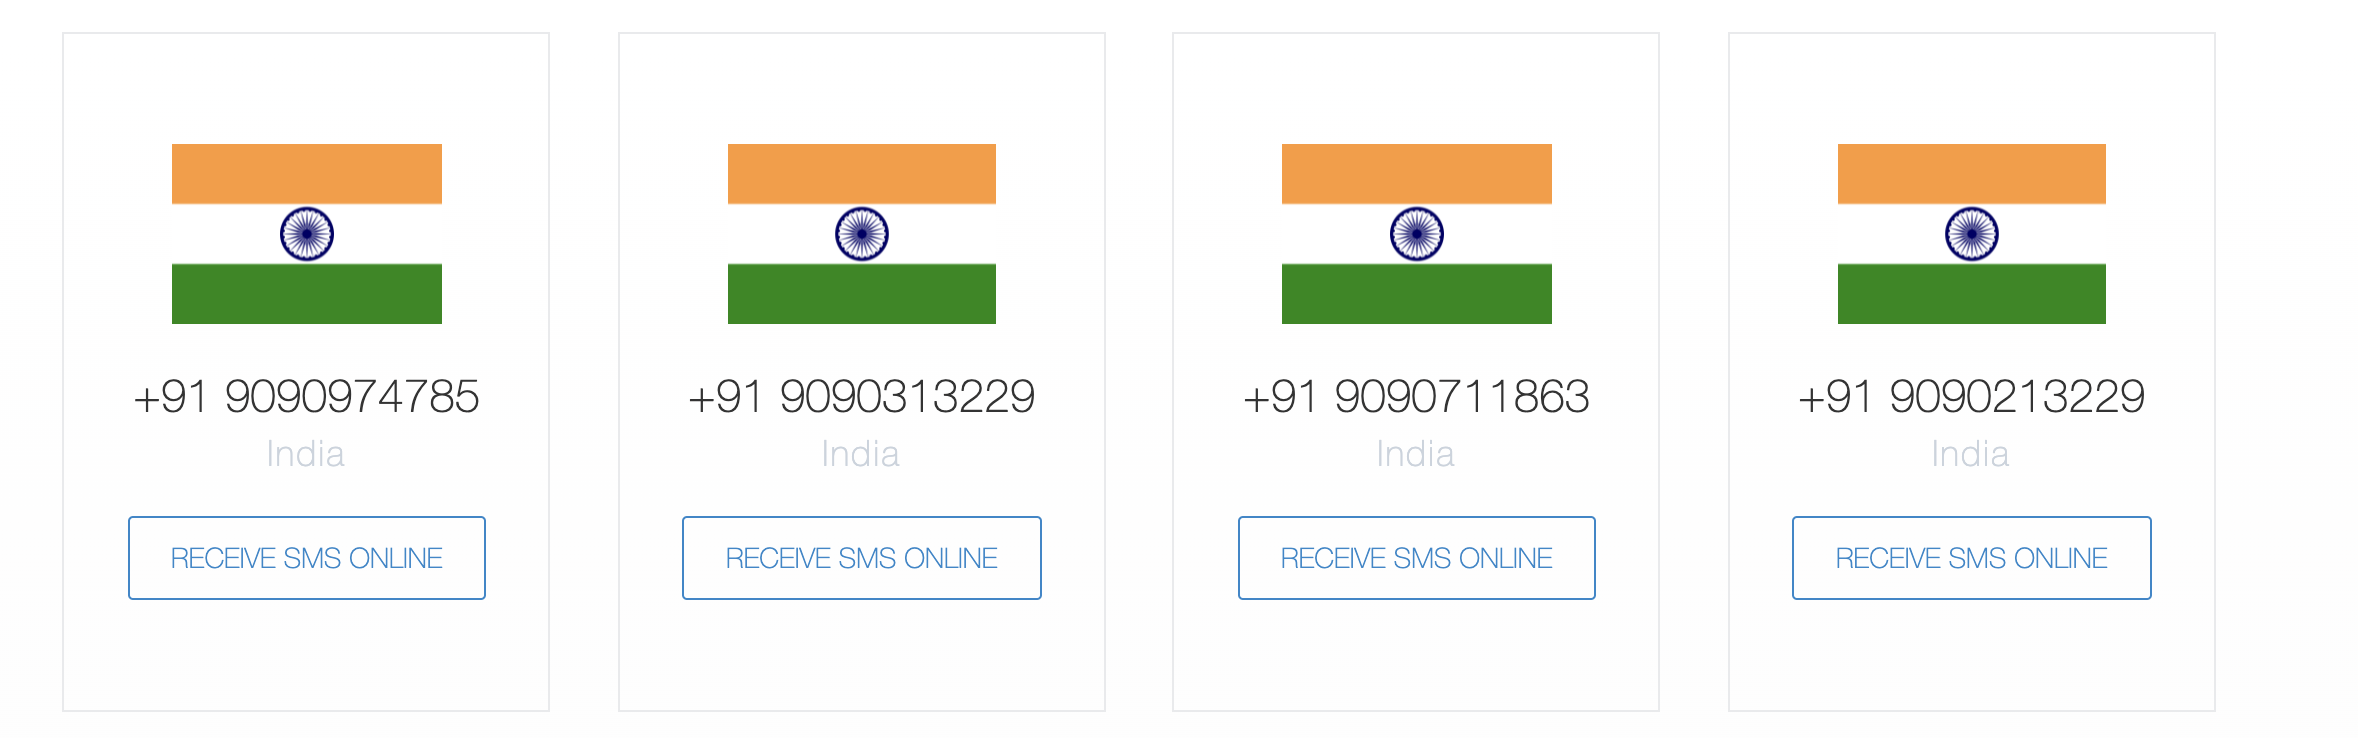 Click on Receive SMS Online